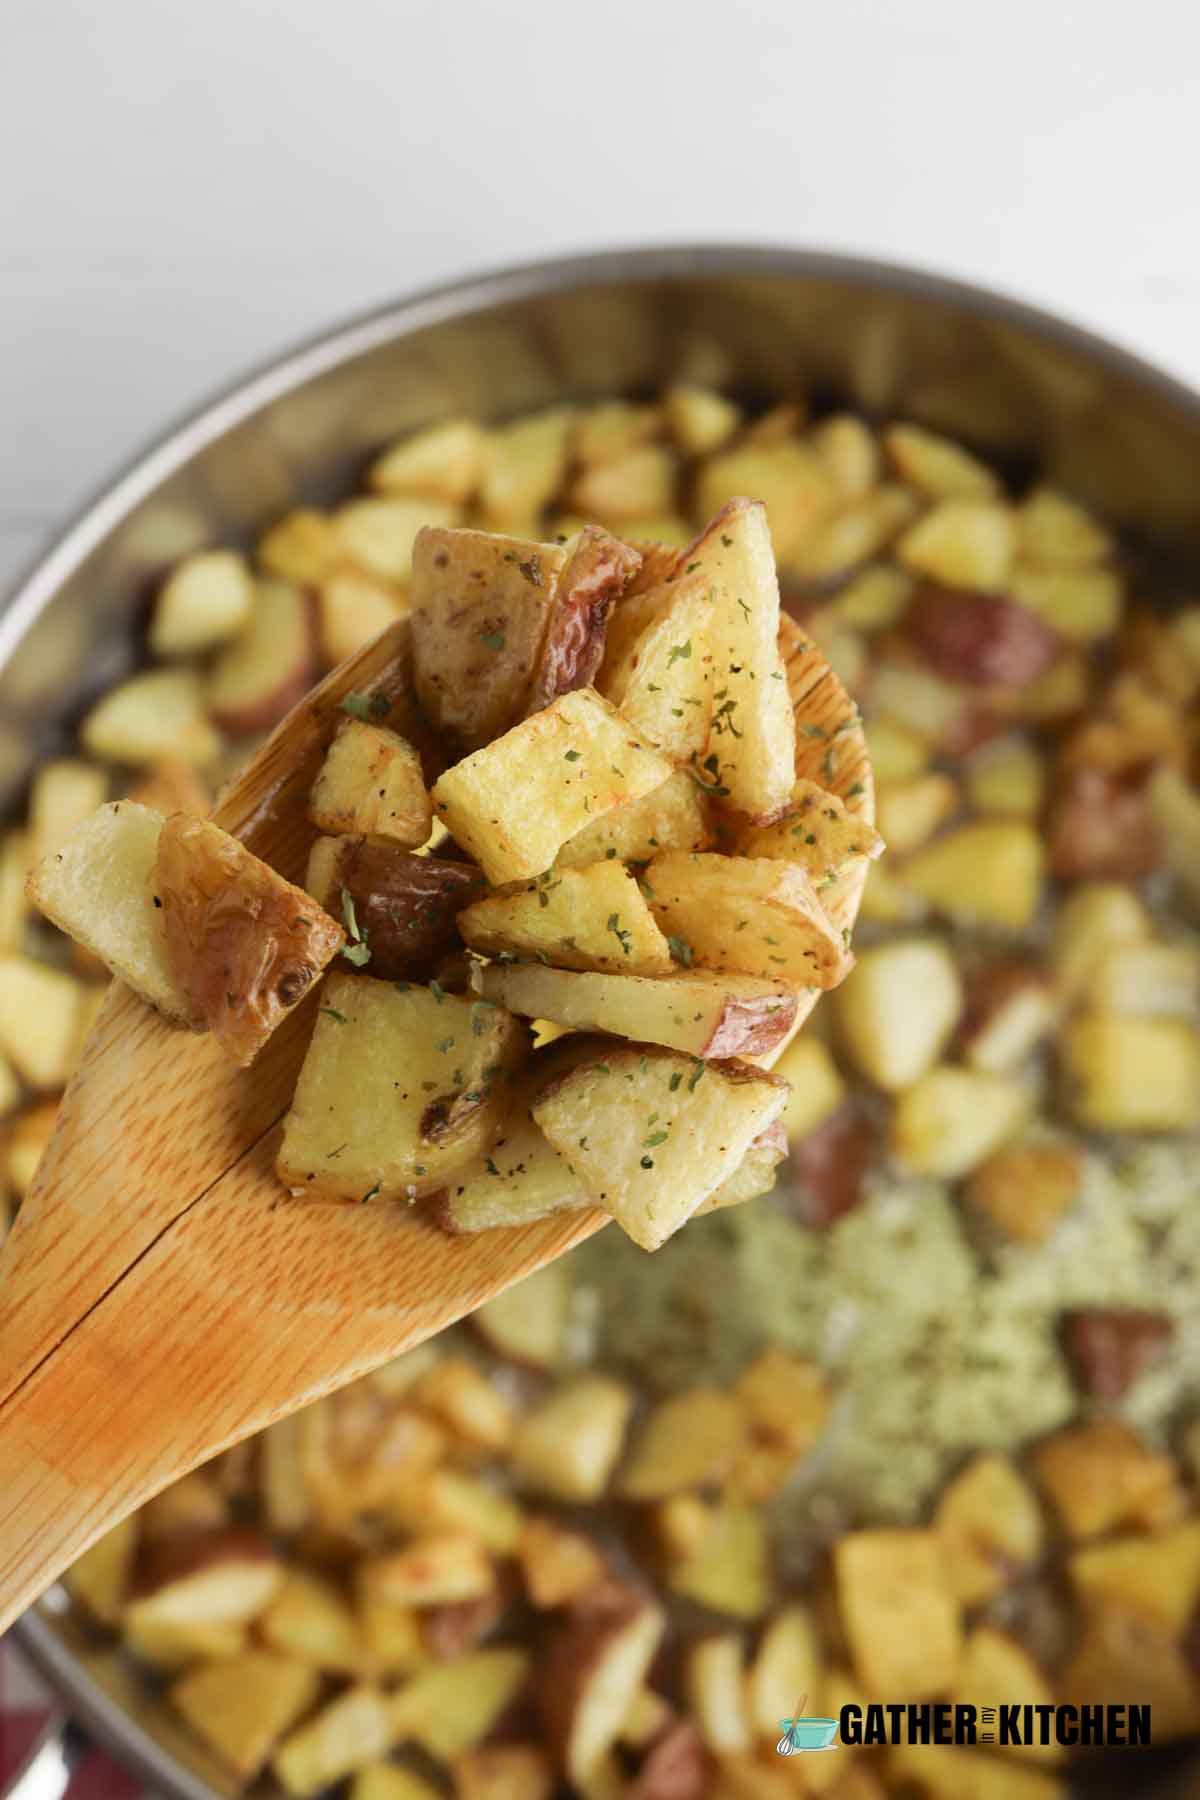 Wooden spoon holding cooked fried potatoes over pan.